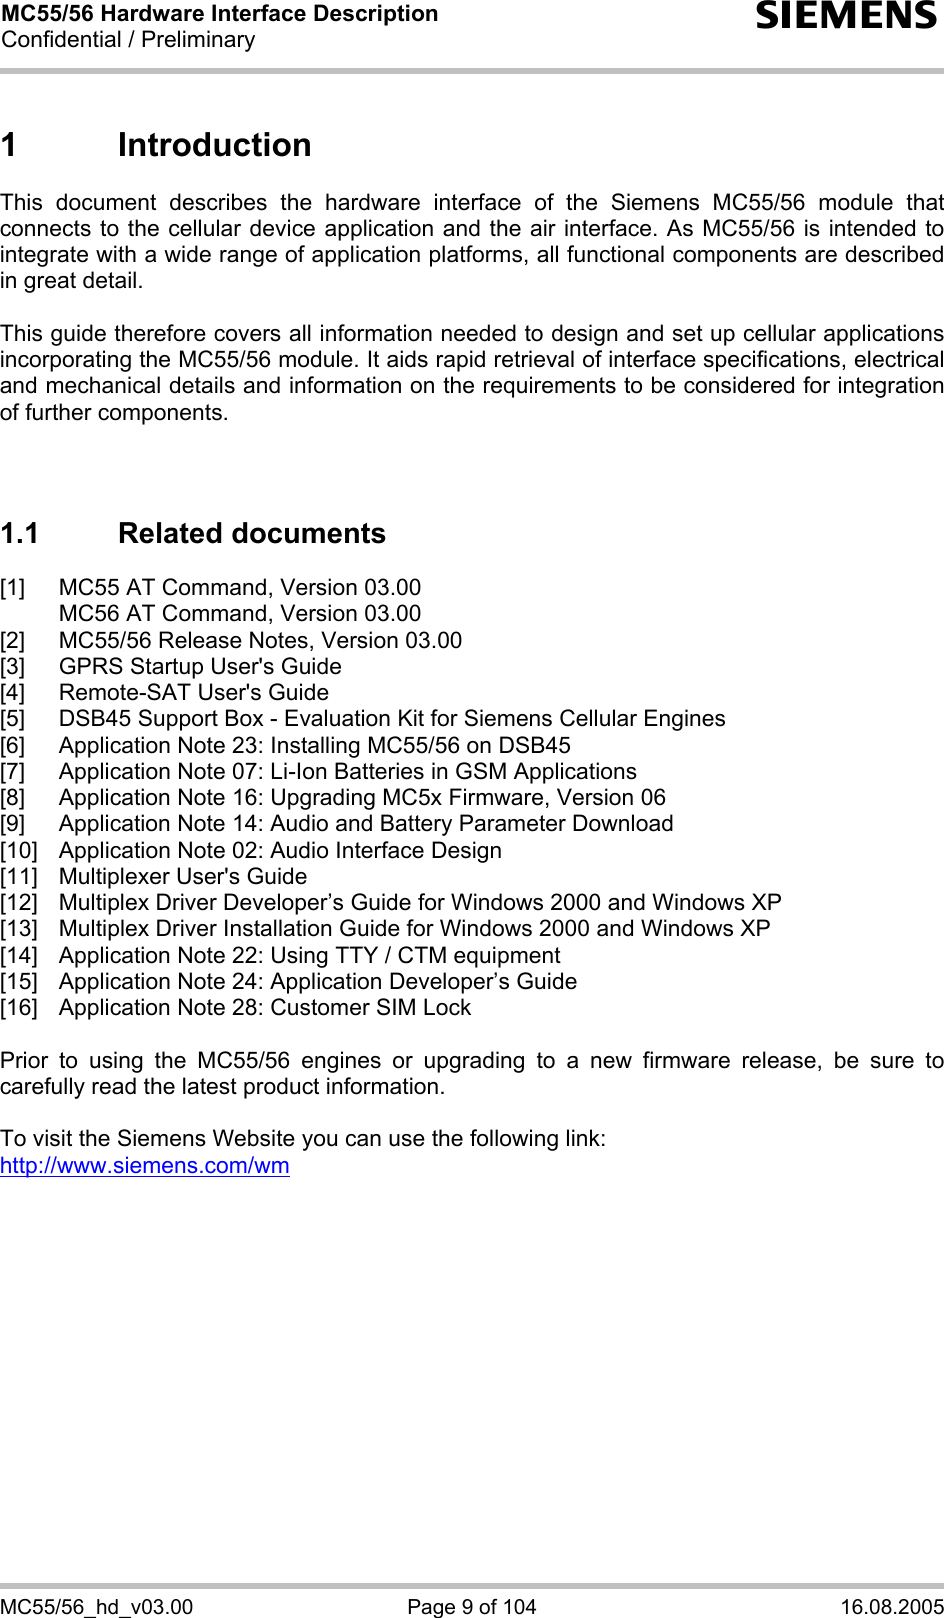 MC55/56 Hardware Interface Description Confidential / Preliminary s MC55/56_hd_v03.00  Page 9 of 104  16.08.2005 1 Introduction This document describes the hardware interface of the Siemens MC55/56 module that connects to the cellular device application and the air interface. As MC55/56 is intended to integrate with a wide range of application platforms, all functional components are described in great detail.  This guide therefore covers all information needed to design and set up cellular applications incorporating the MC55/56 module. It aids rapid retrieval of interface specifications, electrical and mechanical details and information on the requirements to be considered for integration of further components.    1.1 Related documents [1]  MC55 AT Command, Version 03.00   MC56 AT Command, Version 03.00 [2]  MC55/56 Release Notes, Version 03.00 [3]  GPRS Startup User&apos;s Guide [4]  Remote-SAT User&apos;s Guide [5]  DSB45 Support Box - Evaluation Kit for Siemens Cellular Engines [6]  Application Note 23: Installing MC55/56 on DSB45 [7]  Application Note 07: Li-Ion Batteries in GSM Applications [8]  Application Note 16: Upgrading MC5x Firmware, Version 06 [9]  Application Note 14: Audio and Battery Parameter Download [10]  Application Note 02: Audio Interface Design [11]  Multiplexer User&apos;s Guide [12]  Multiplex Driver Developer’s Guide for Windows 2000 and Windows XP [13]  Multiplex Driver Installation Guide for Windows 2000 and Windows XP [14]  Application Note 22: Using TTY / CTM equipment [15]  Application Note 24: Application Developer’s Guide [16]  Application Note 28: Customer SIM Lock  Prior to using the MC55/56 engines or upgrading to a new firmware release, be sure to carefully read the latest product information.  To visit the Siemens Website you can use the following link: http://www.siemens.com/wm   